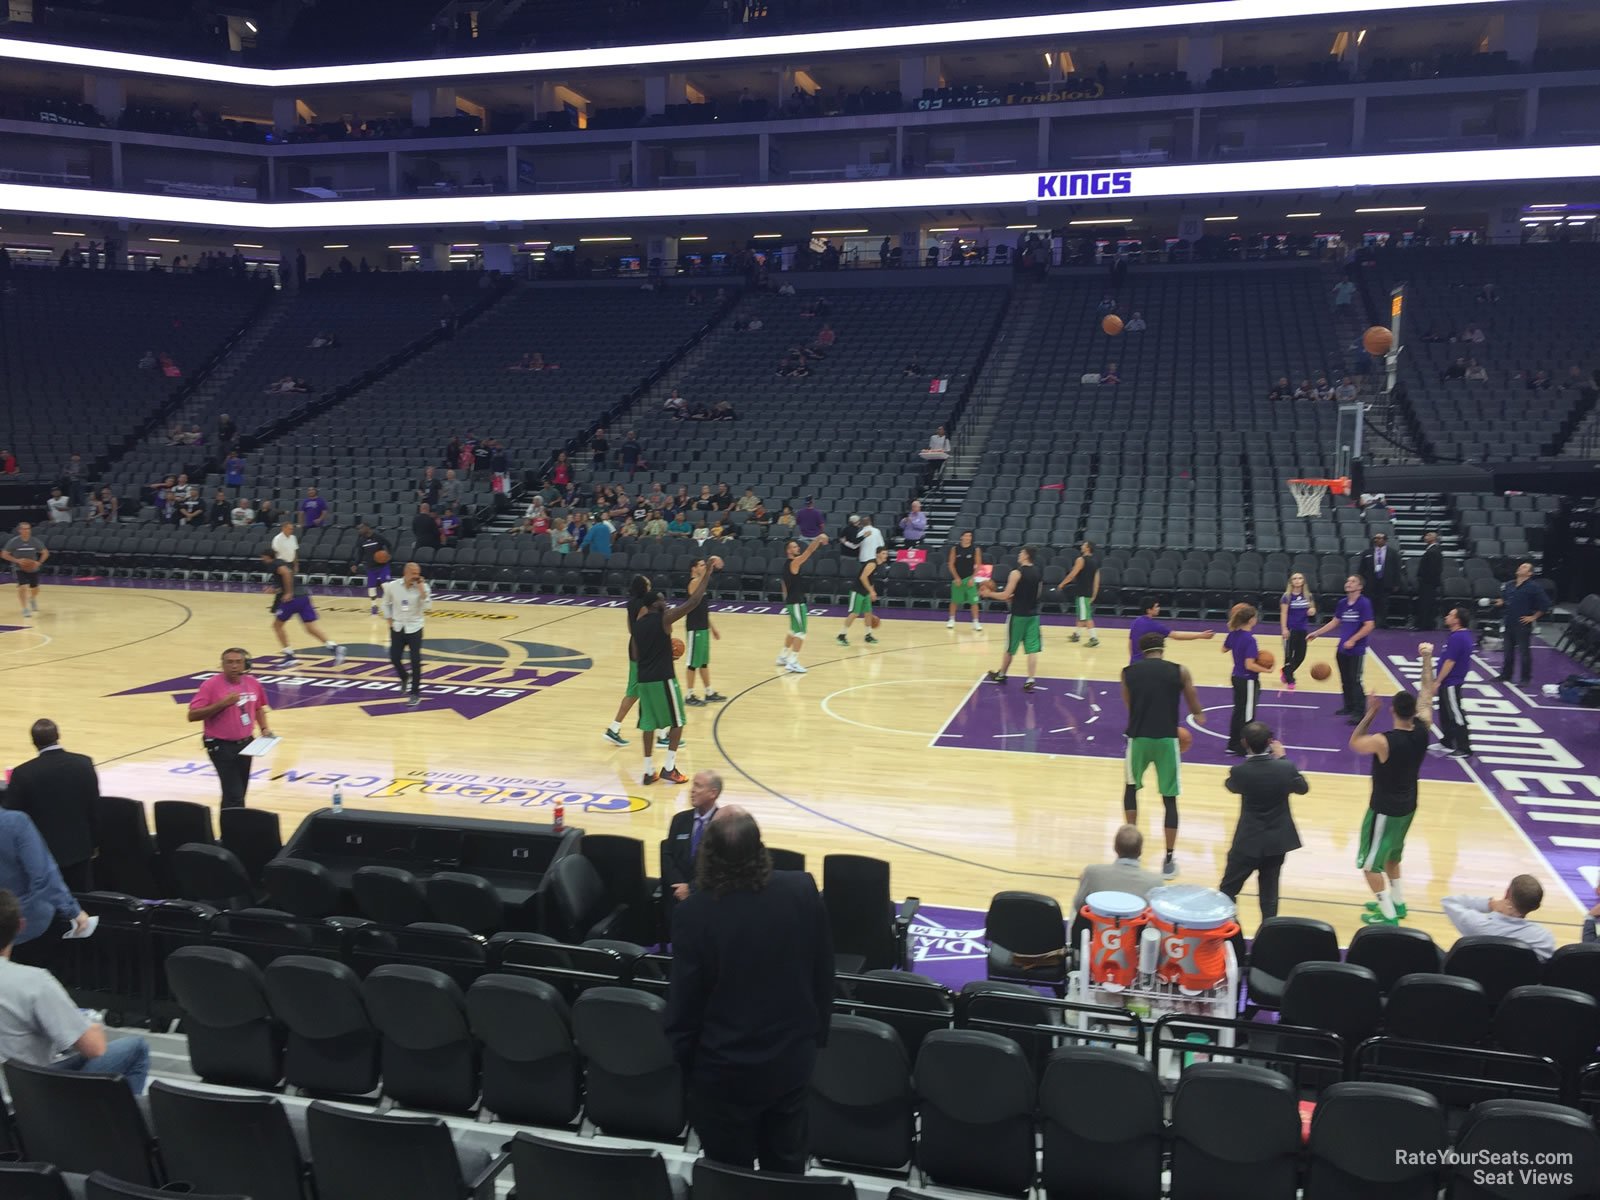 section 106, row dd seat view  for basketball - golden 1 center